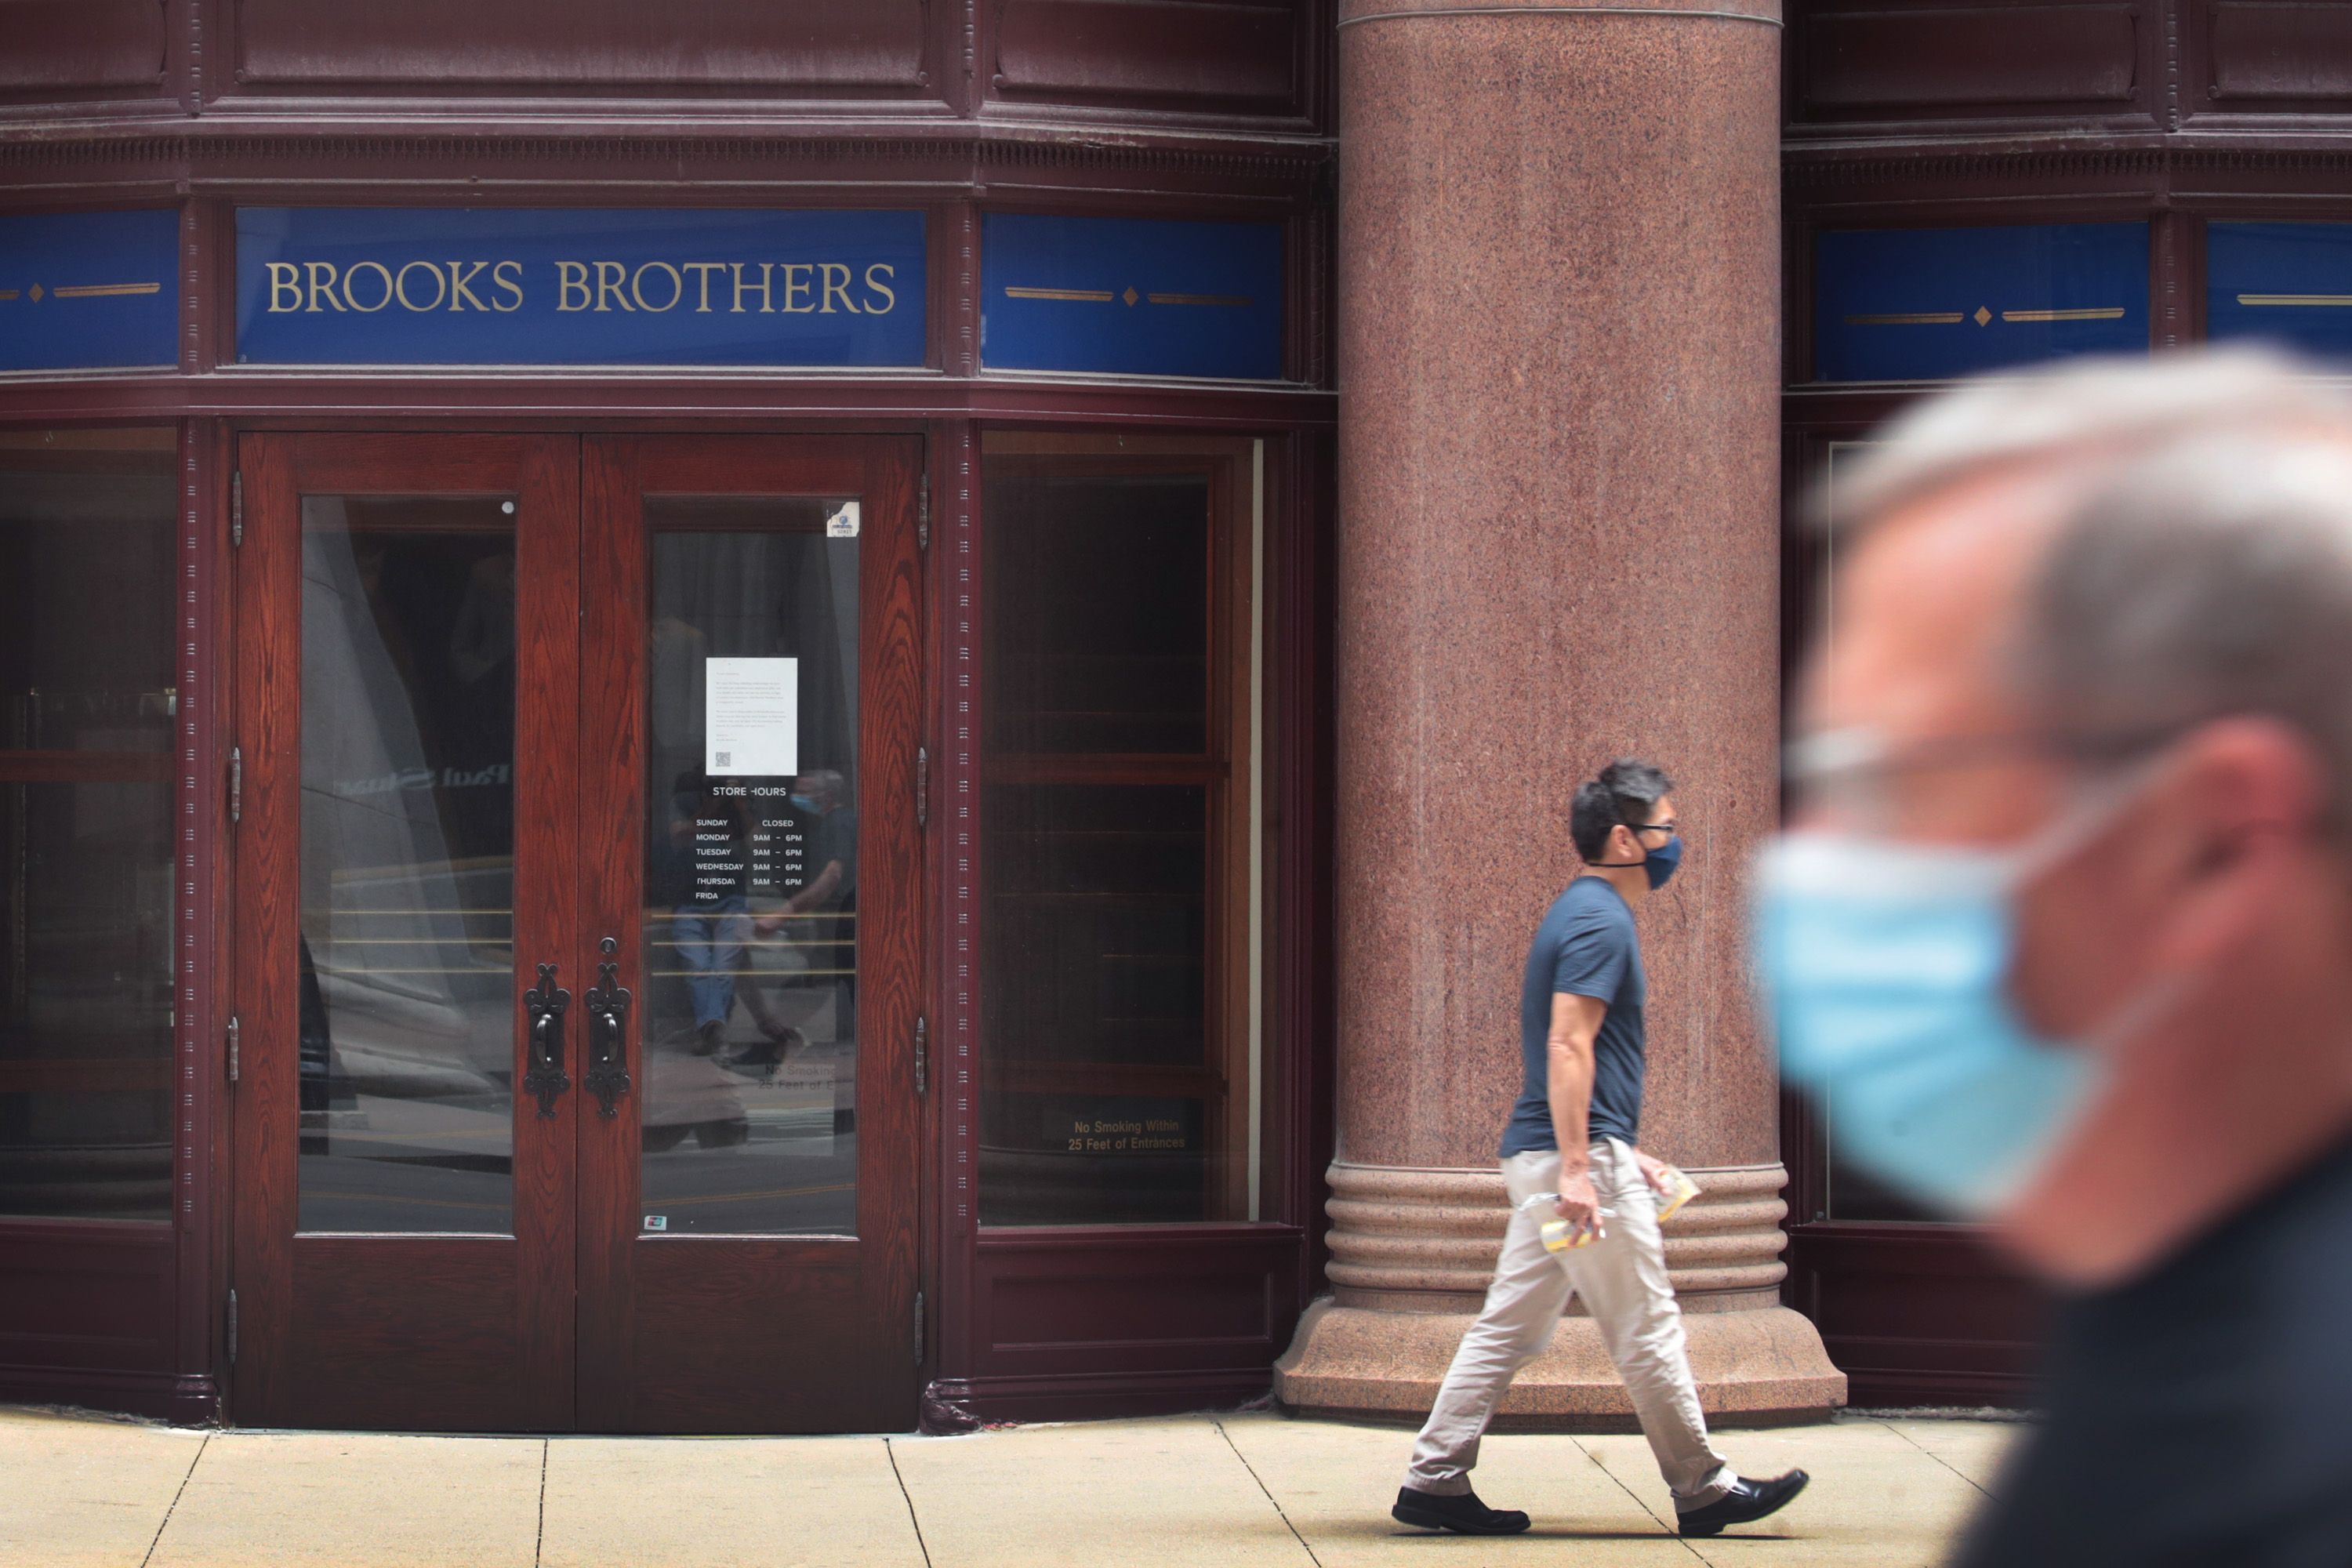 Where Do We Go After Brooks Brothers?